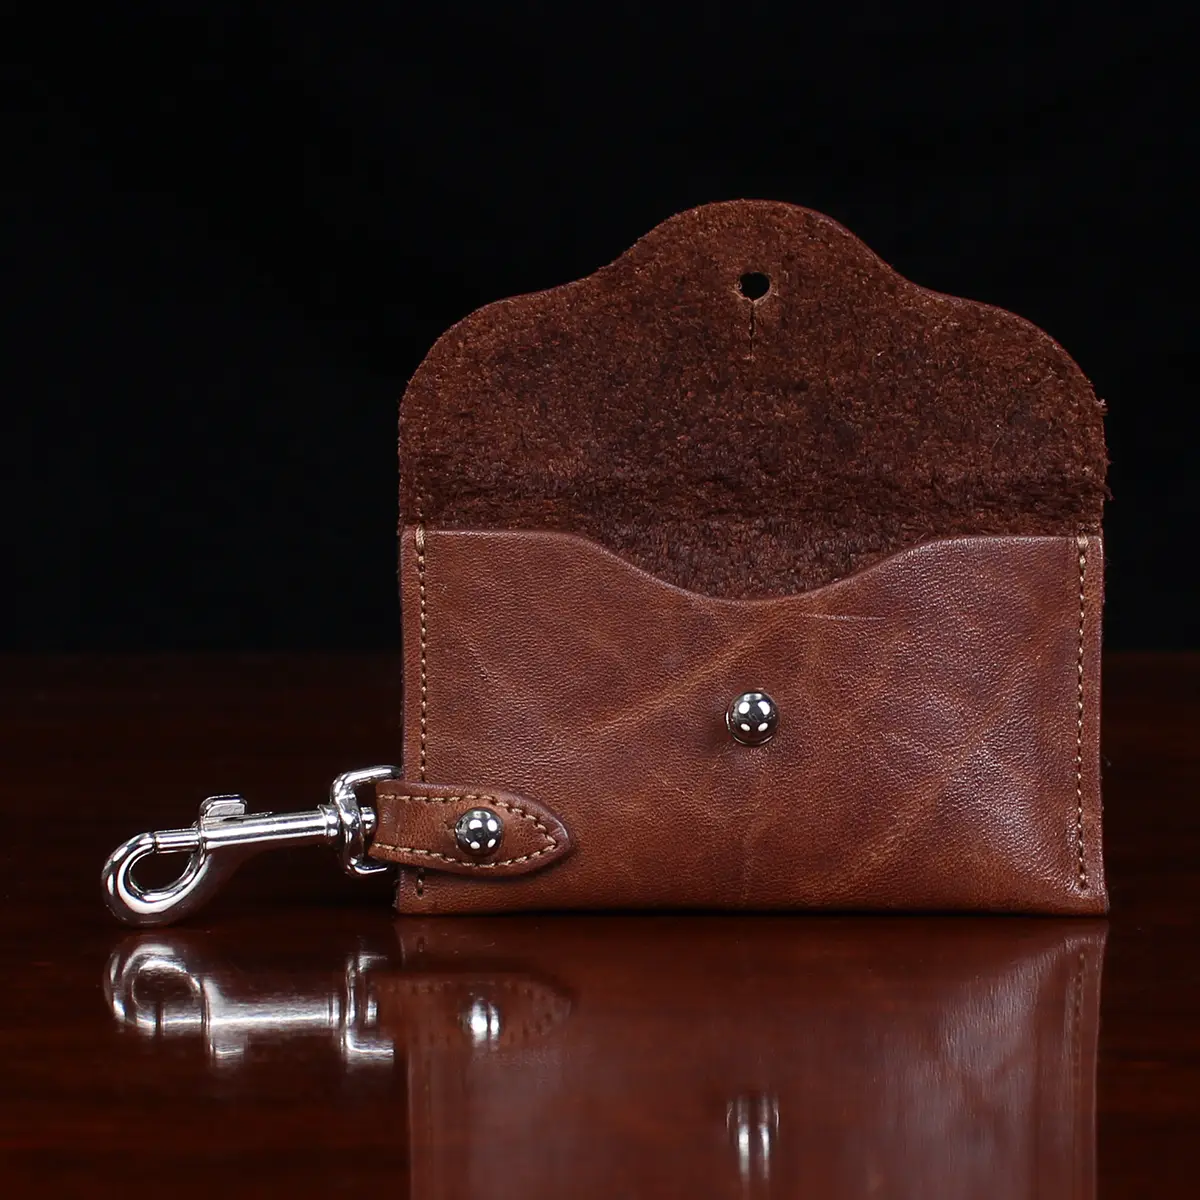 Little Brown Bag Key Pouch - 100% Exclusive